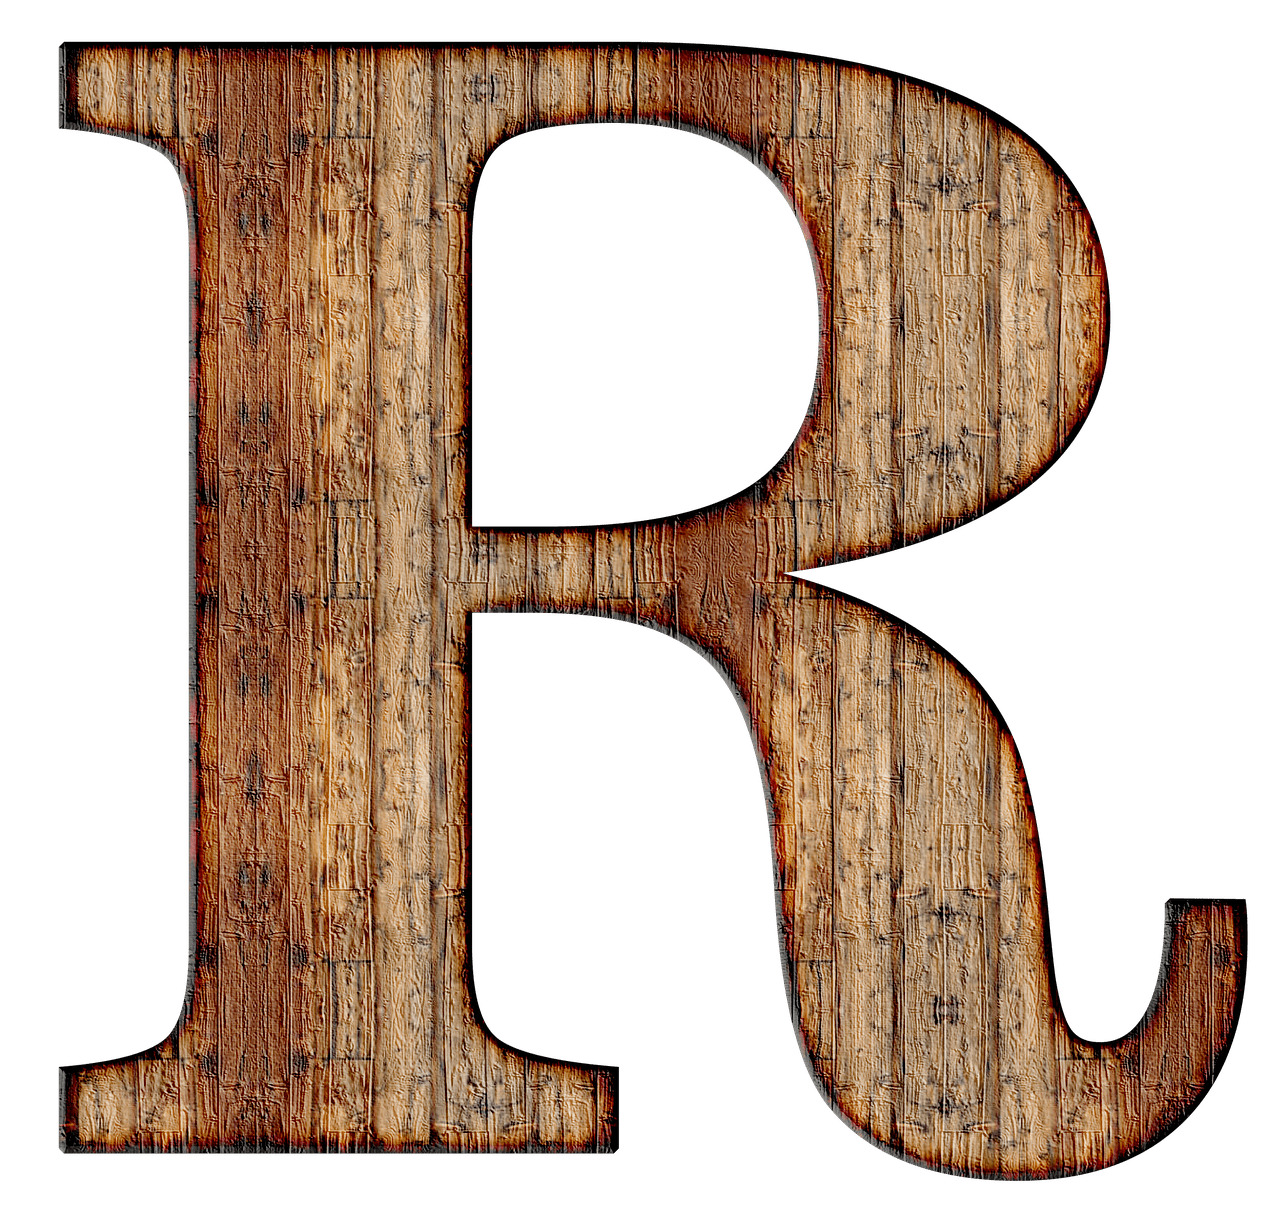 Wooden Capital Letter R icons